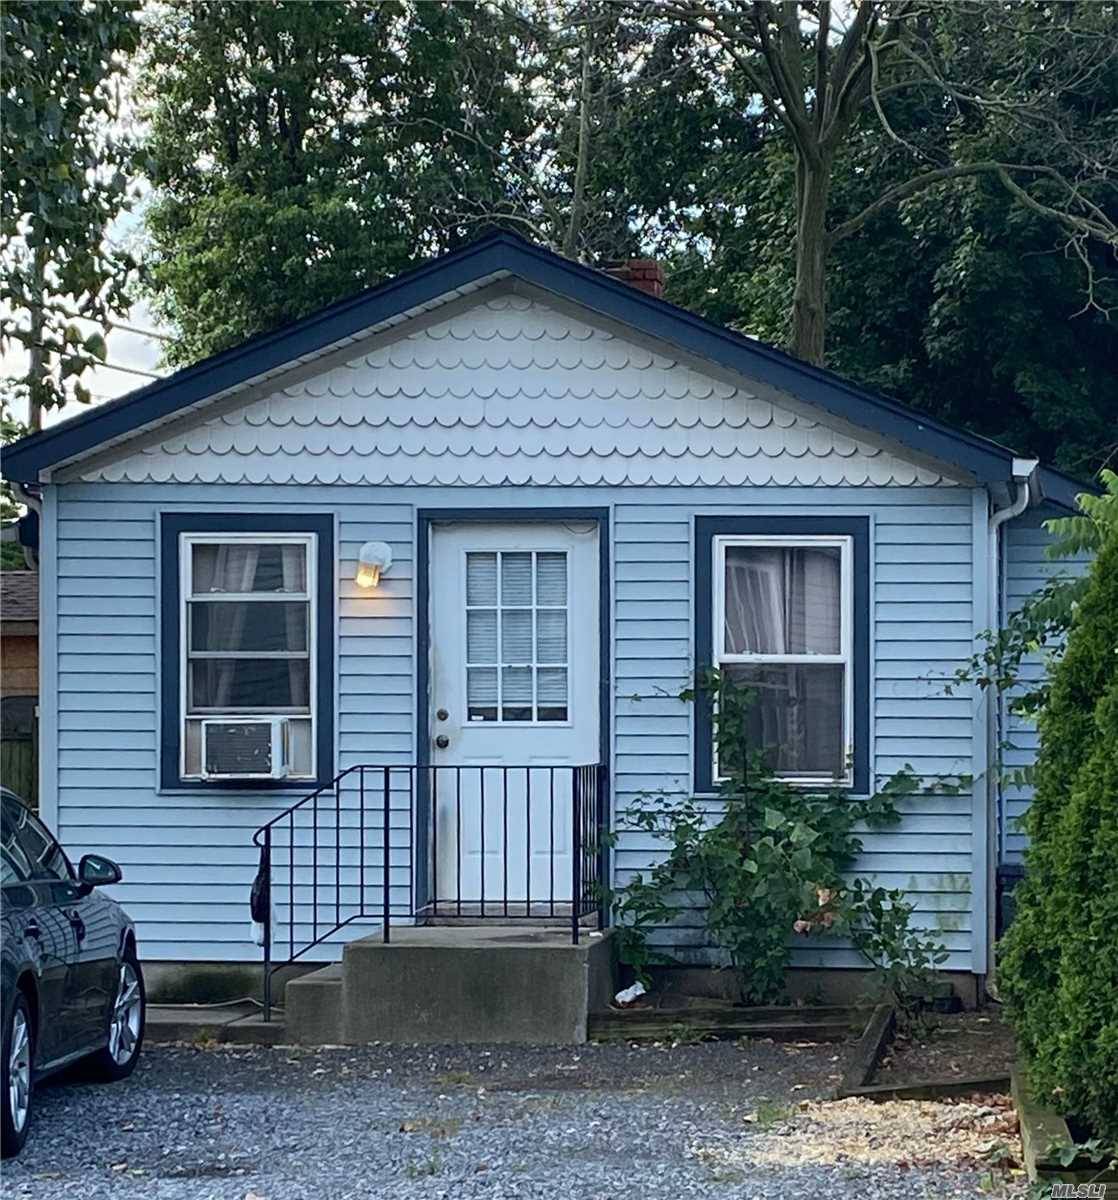 Completely Renovated Two Bedroom, One Bath Cottage Featuring Open Floor Plan Design, Living Room w Luxury Vinyl Tile, EIK w Brand New Appliances Including Dishwasher amp ; W D, Private ...